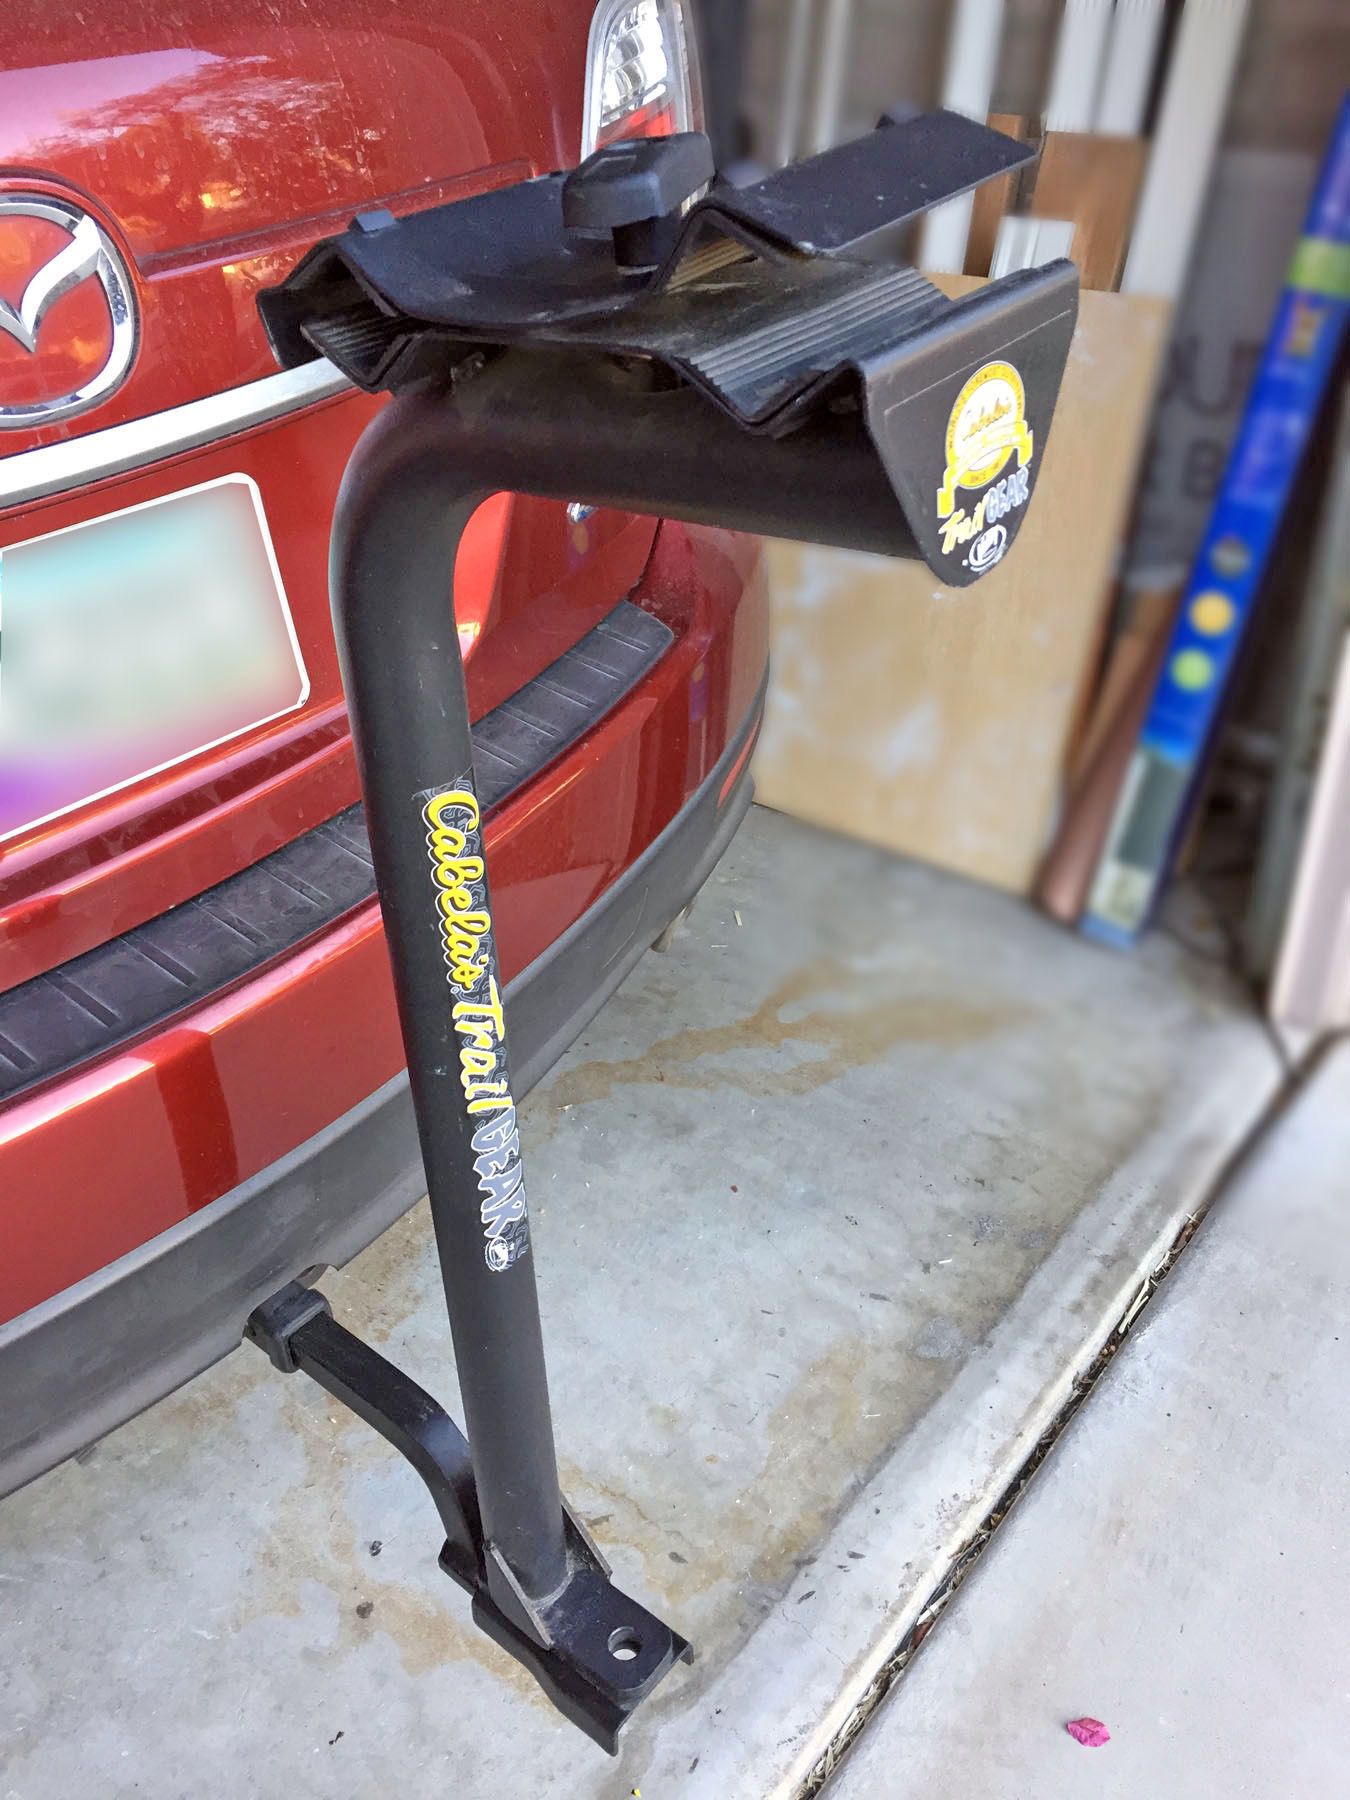 Cabela's Trail Gear Towing Hitch 2-Bike Rack / Carrier - $40